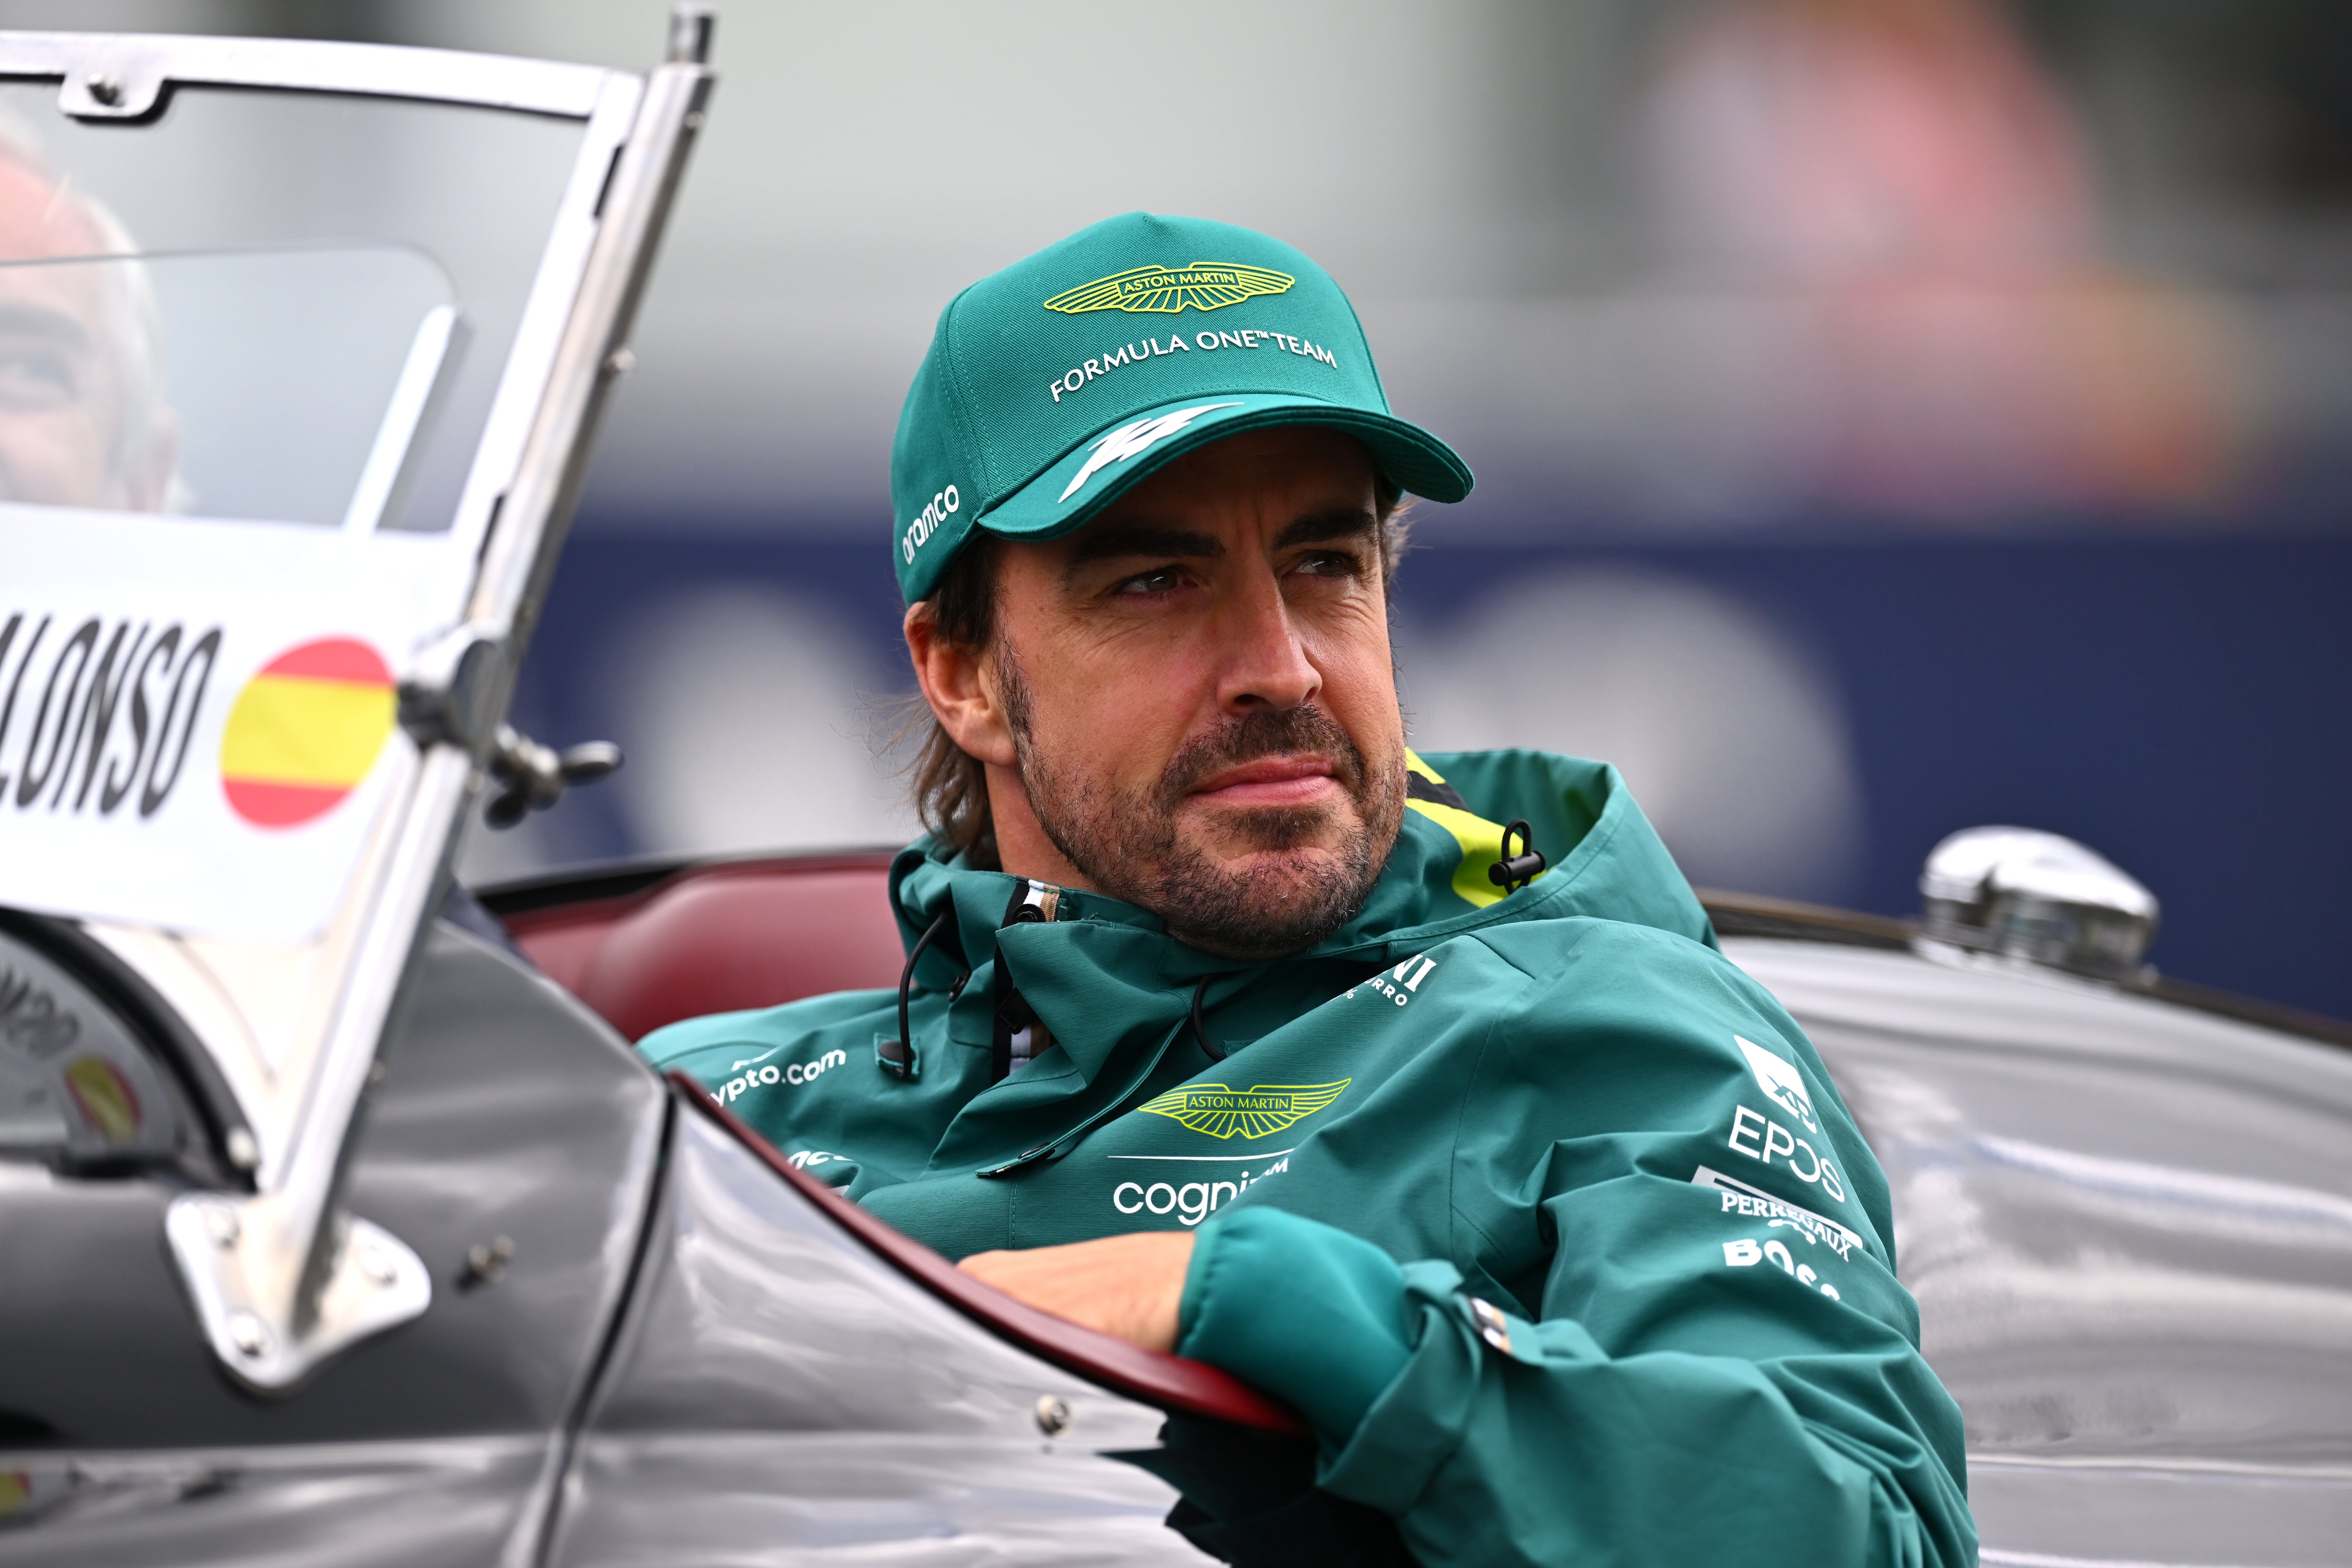 Fernando Alonso reflected on his title regret with Ferrari